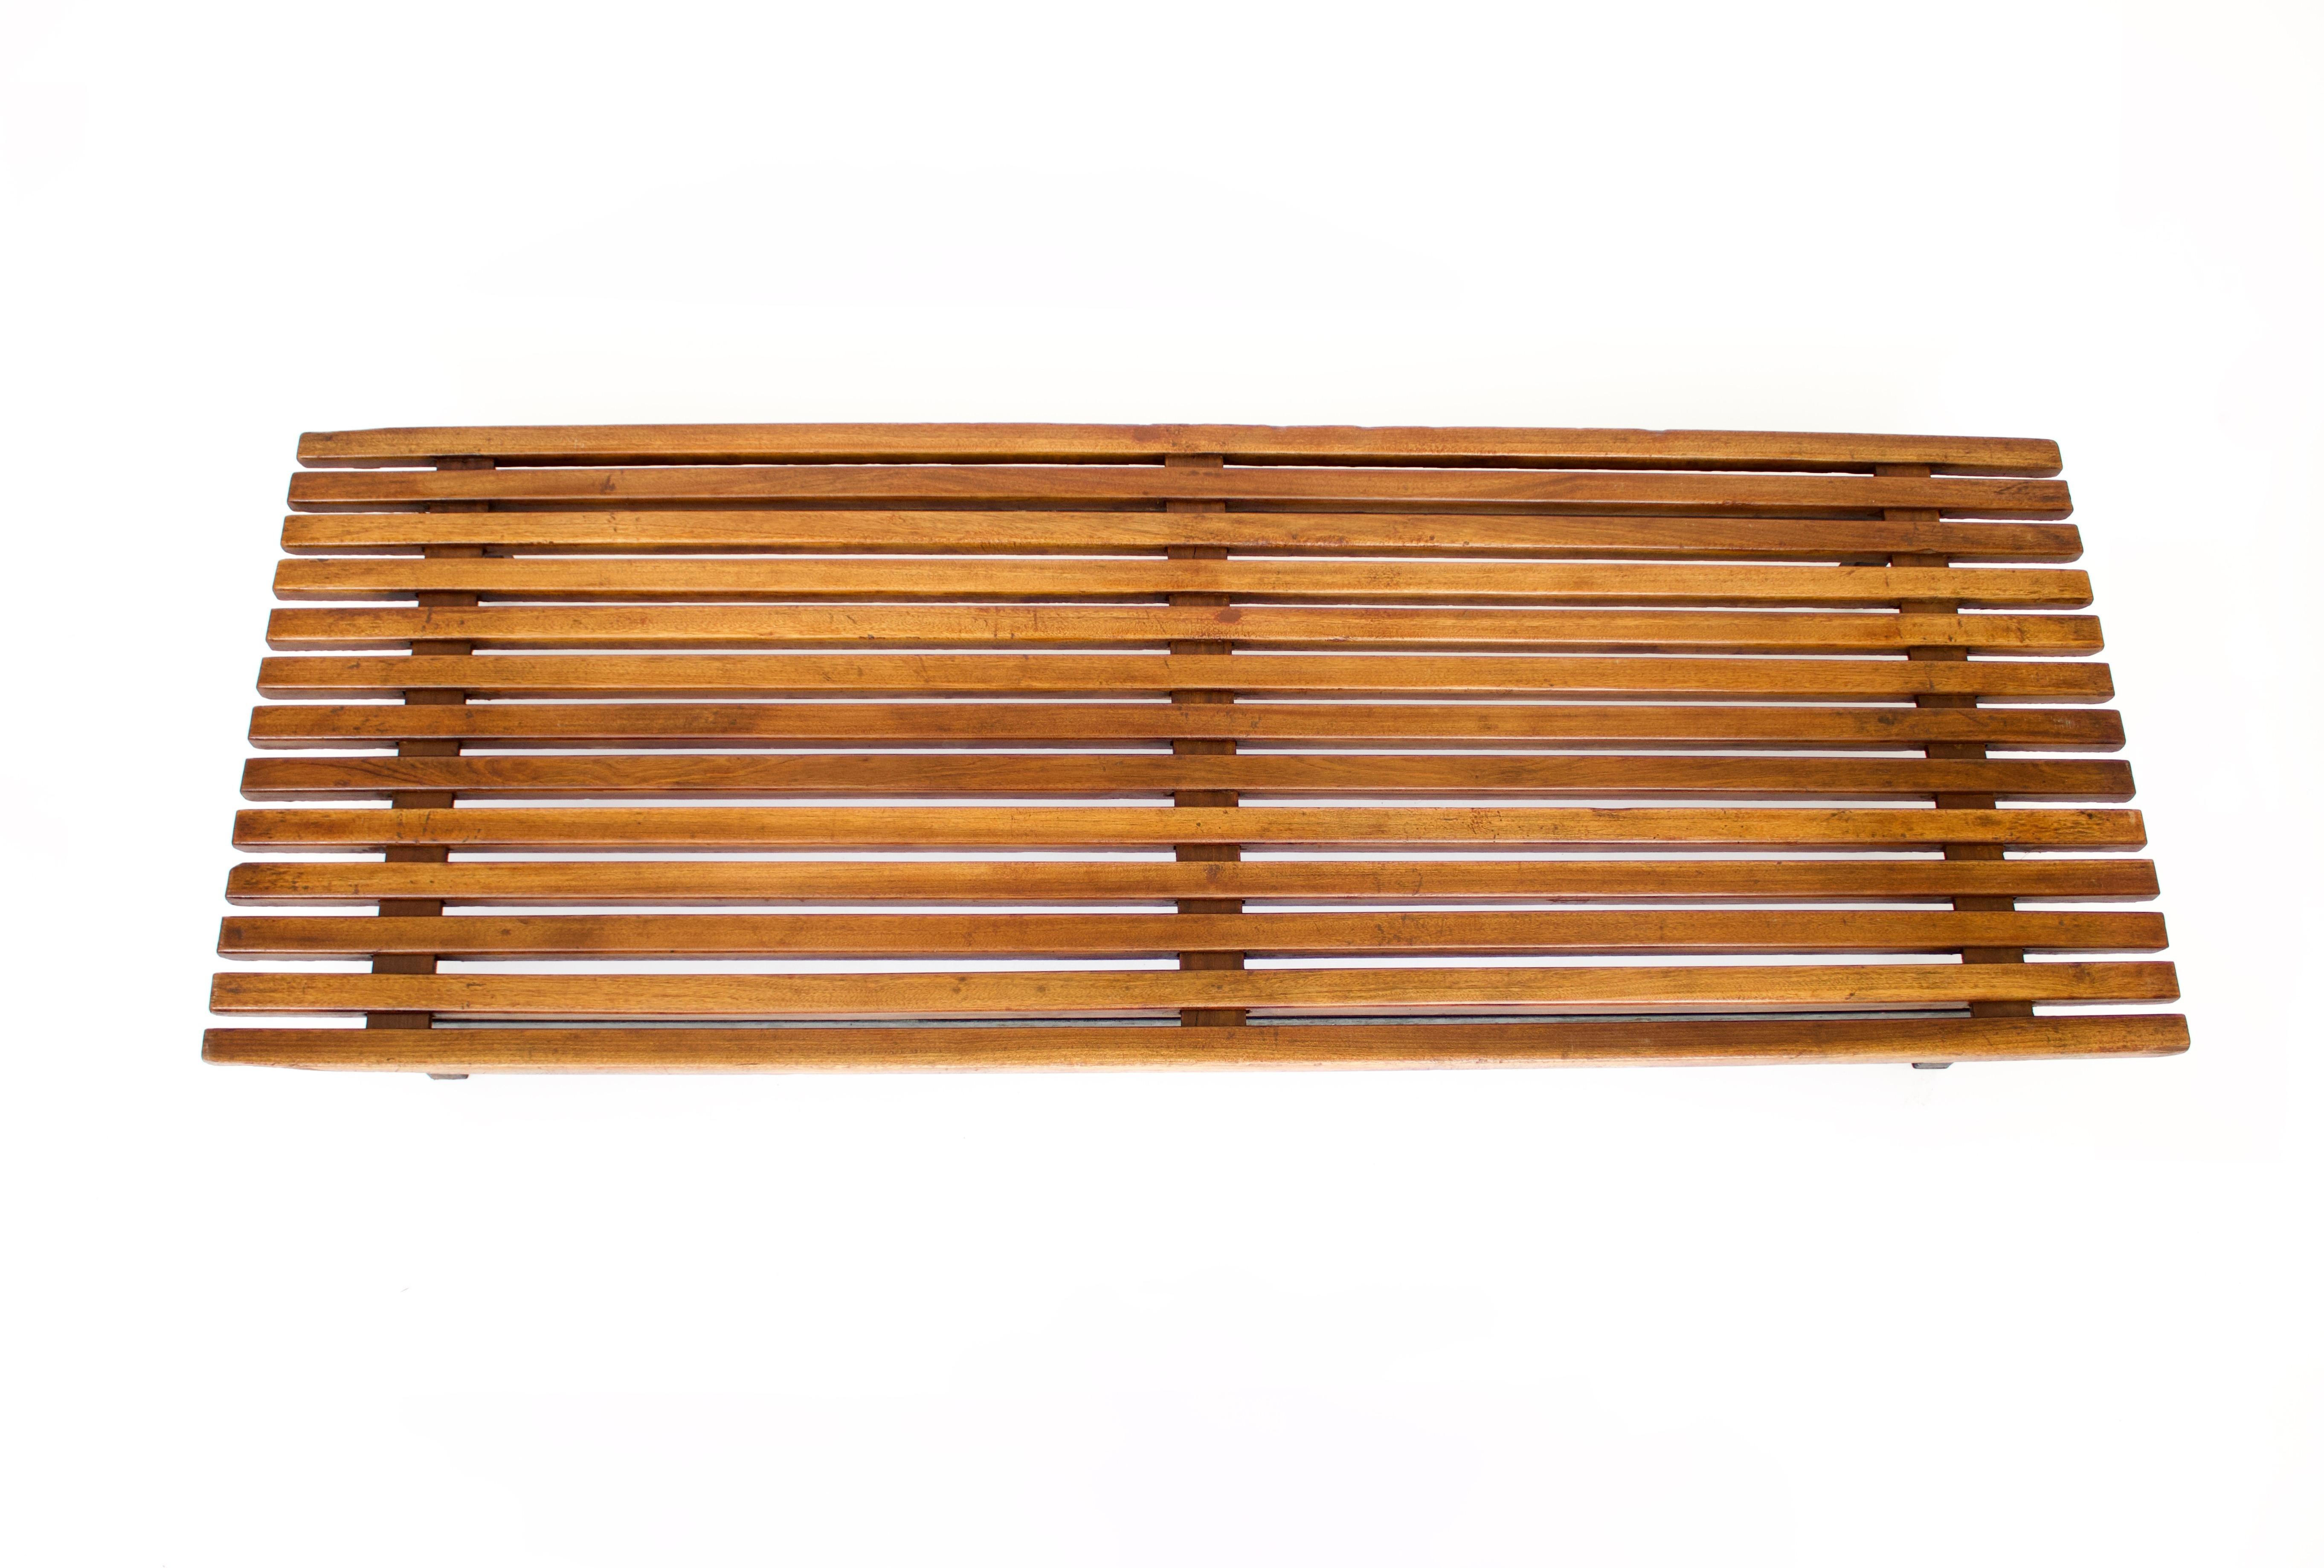 Mid-Century Modern Charlotte Perriand Cansado Bench in Mahogany Wood Bench For Sale